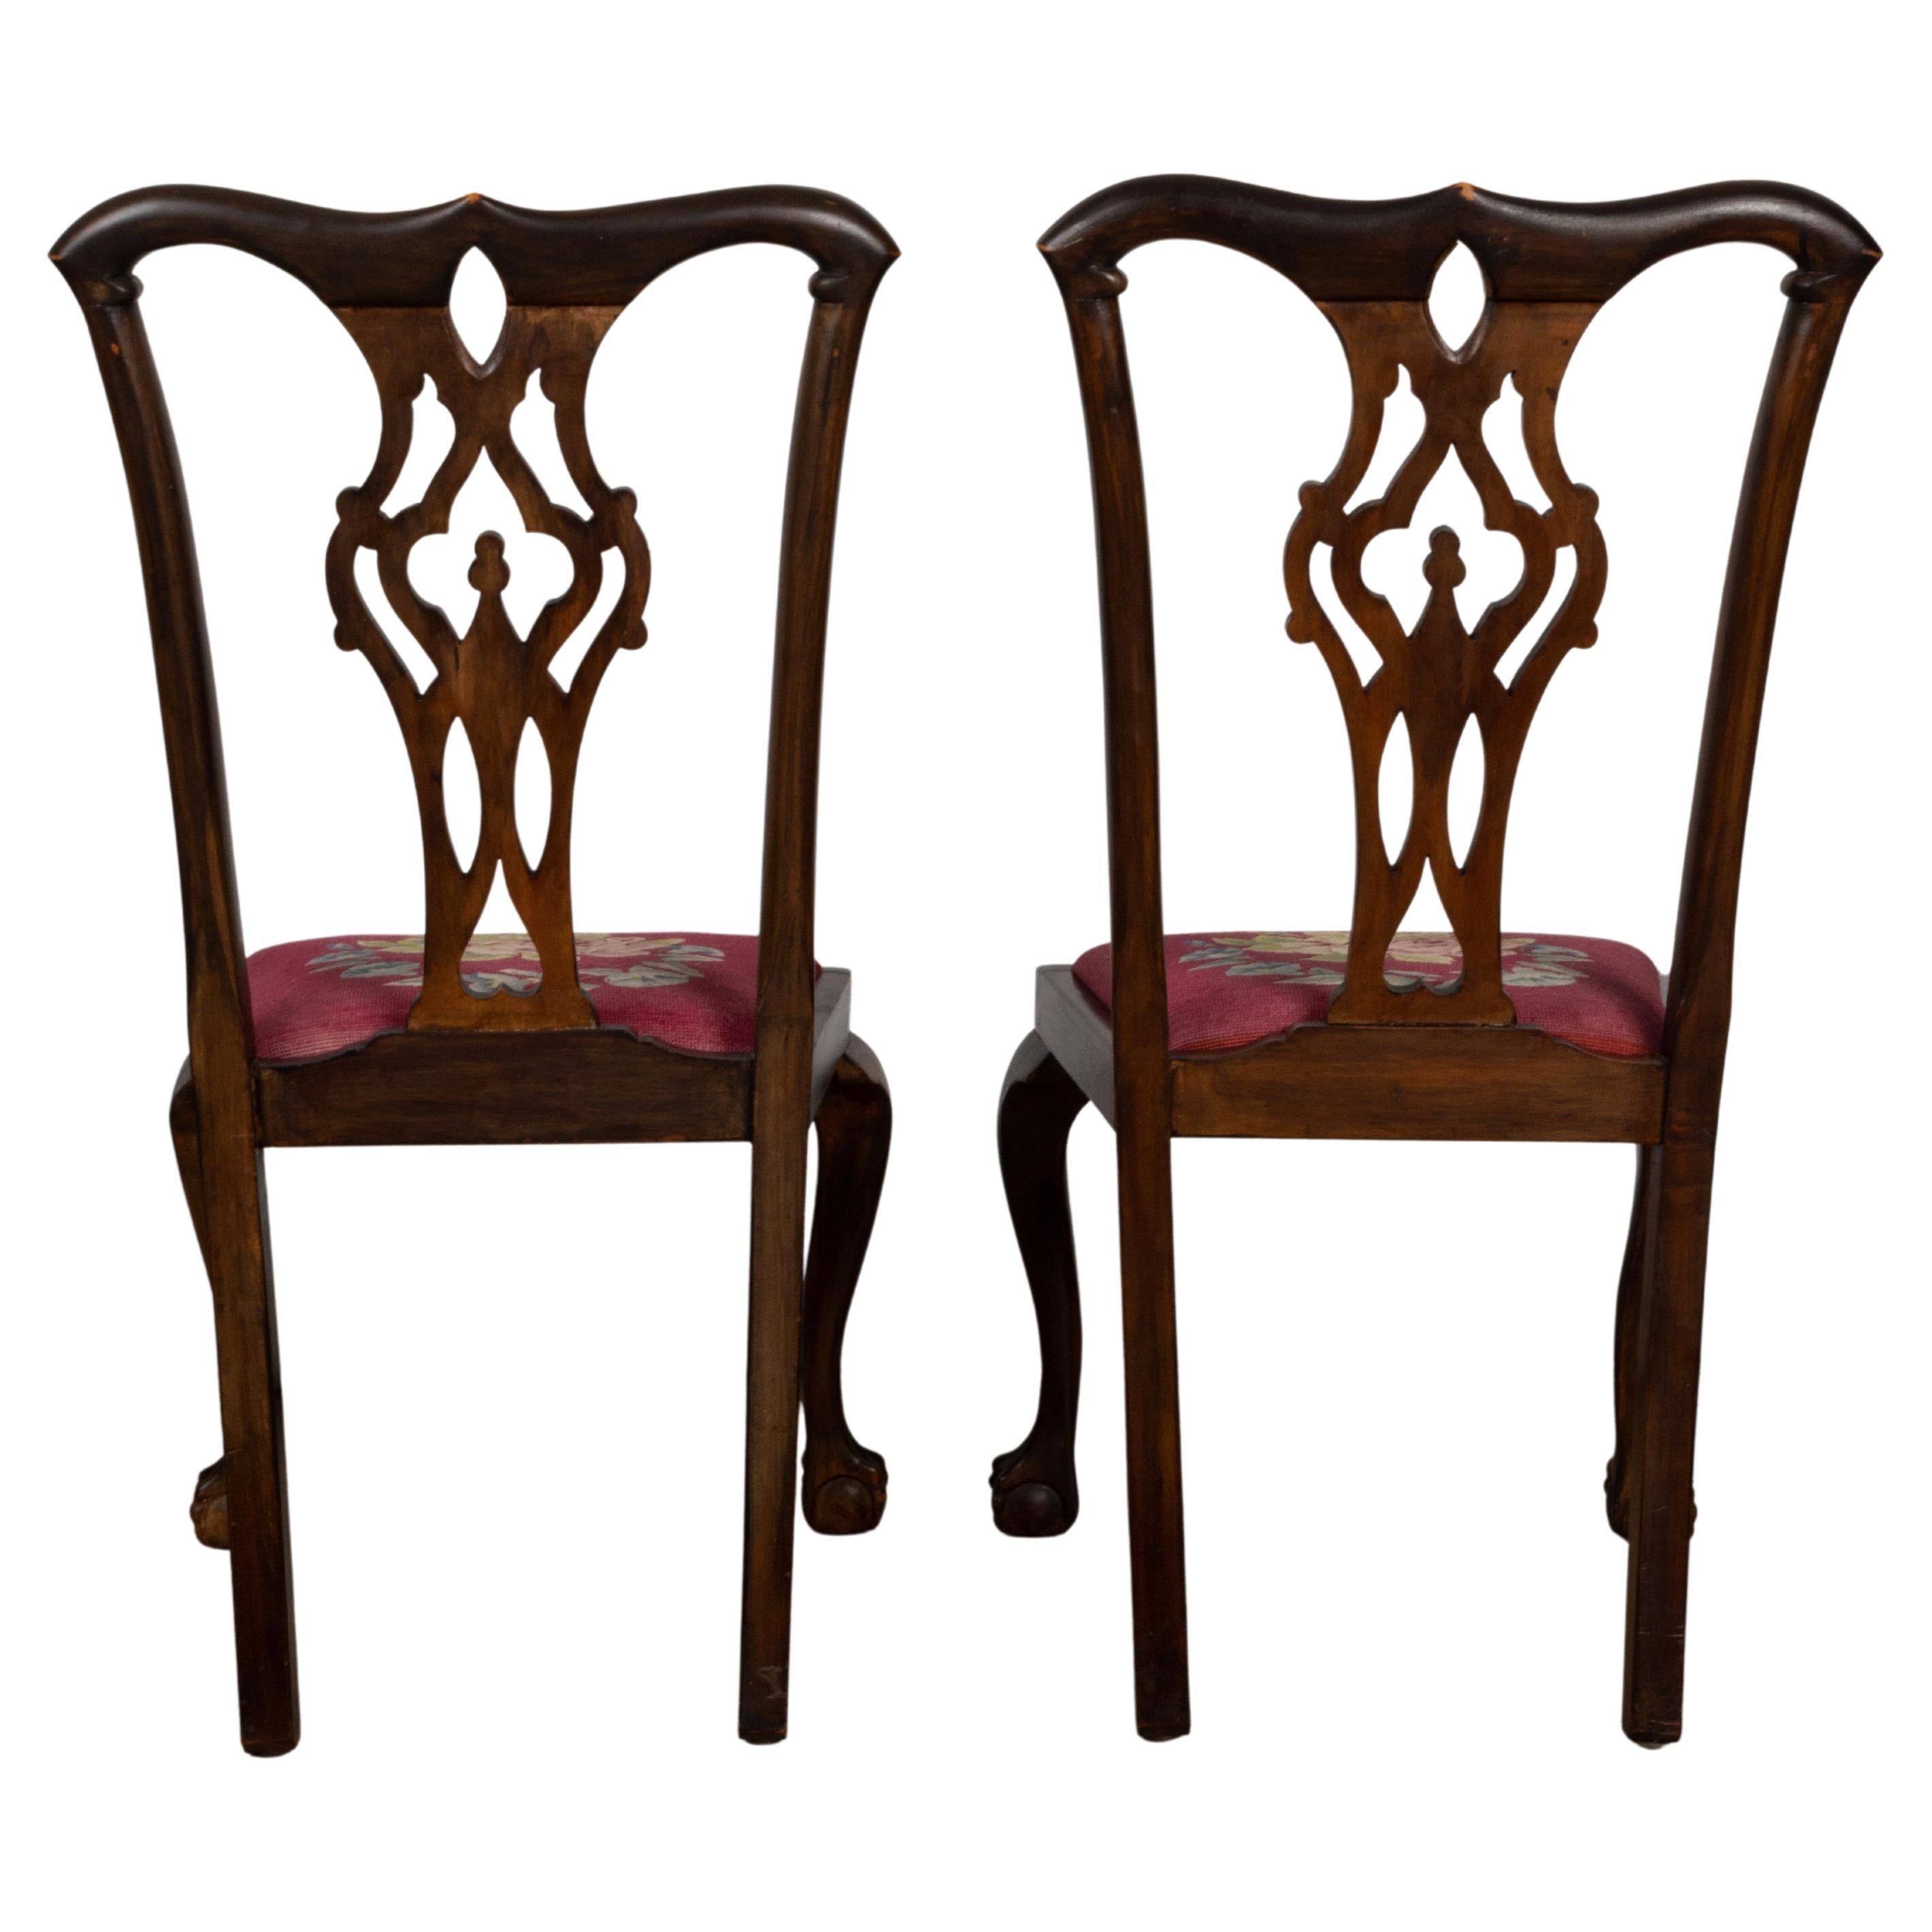 4 Antique English 19th Century Chippendale Revival Mahogany Chairs For Sale 10